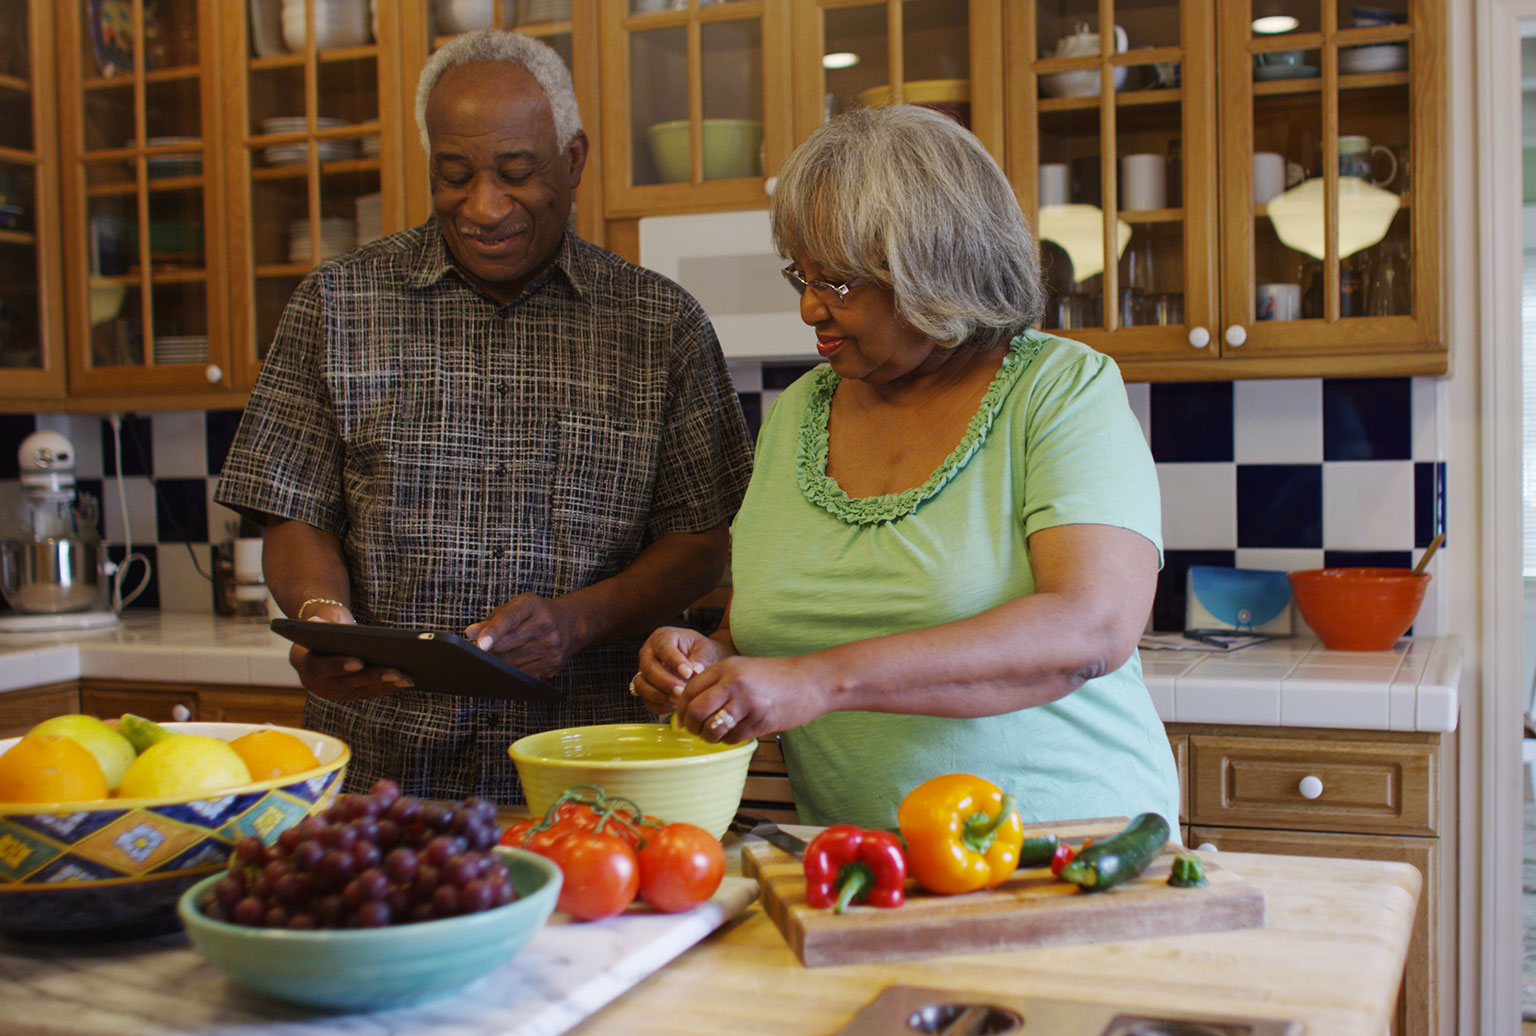 Recipe This  Top 25 Best Kitchen Gadgets For The Elderly